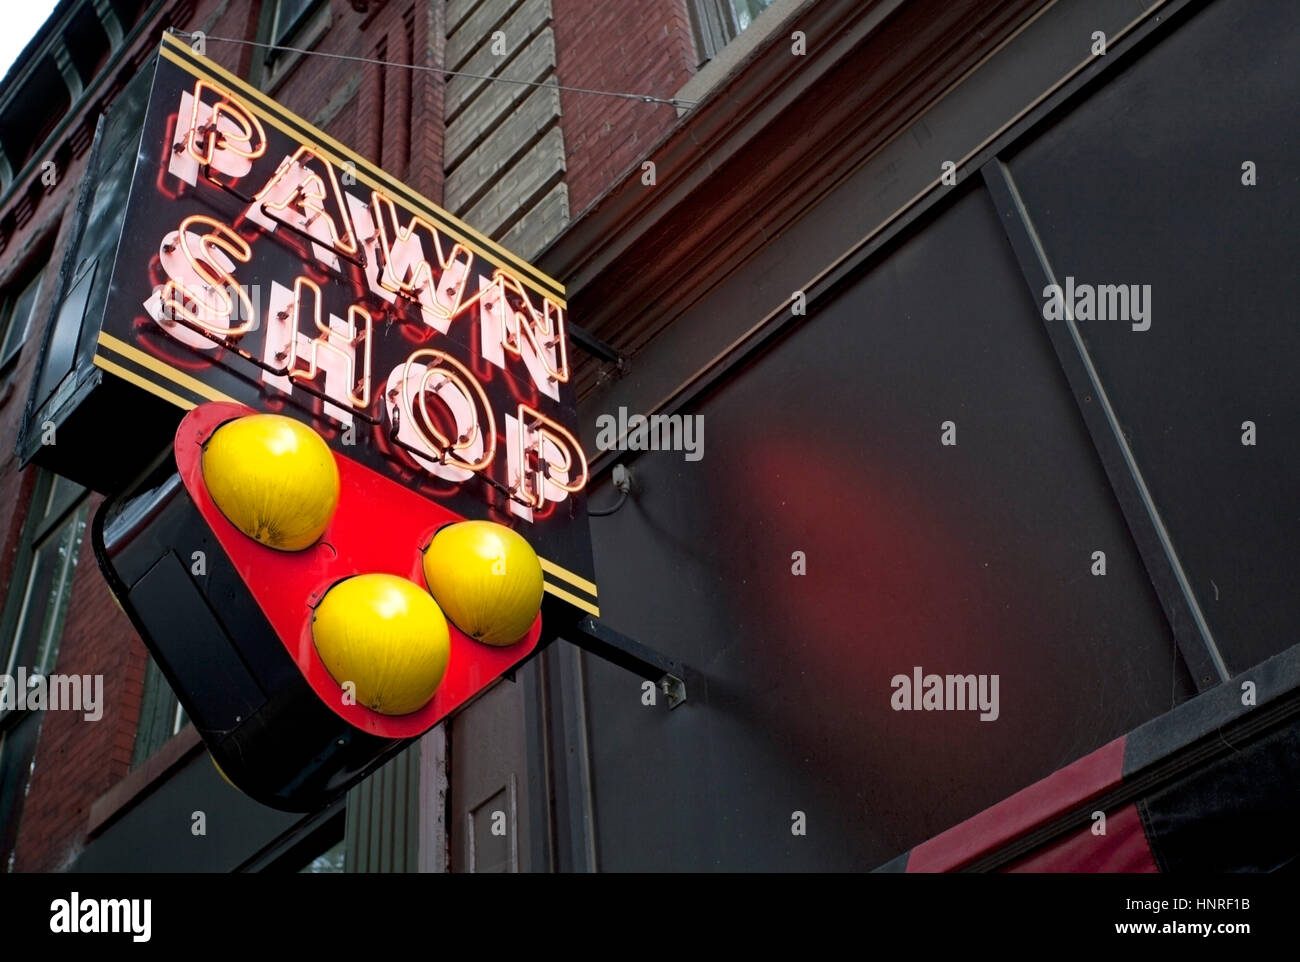 Neon PAWN SHOP sign with three balls attached to building. Stock Photo